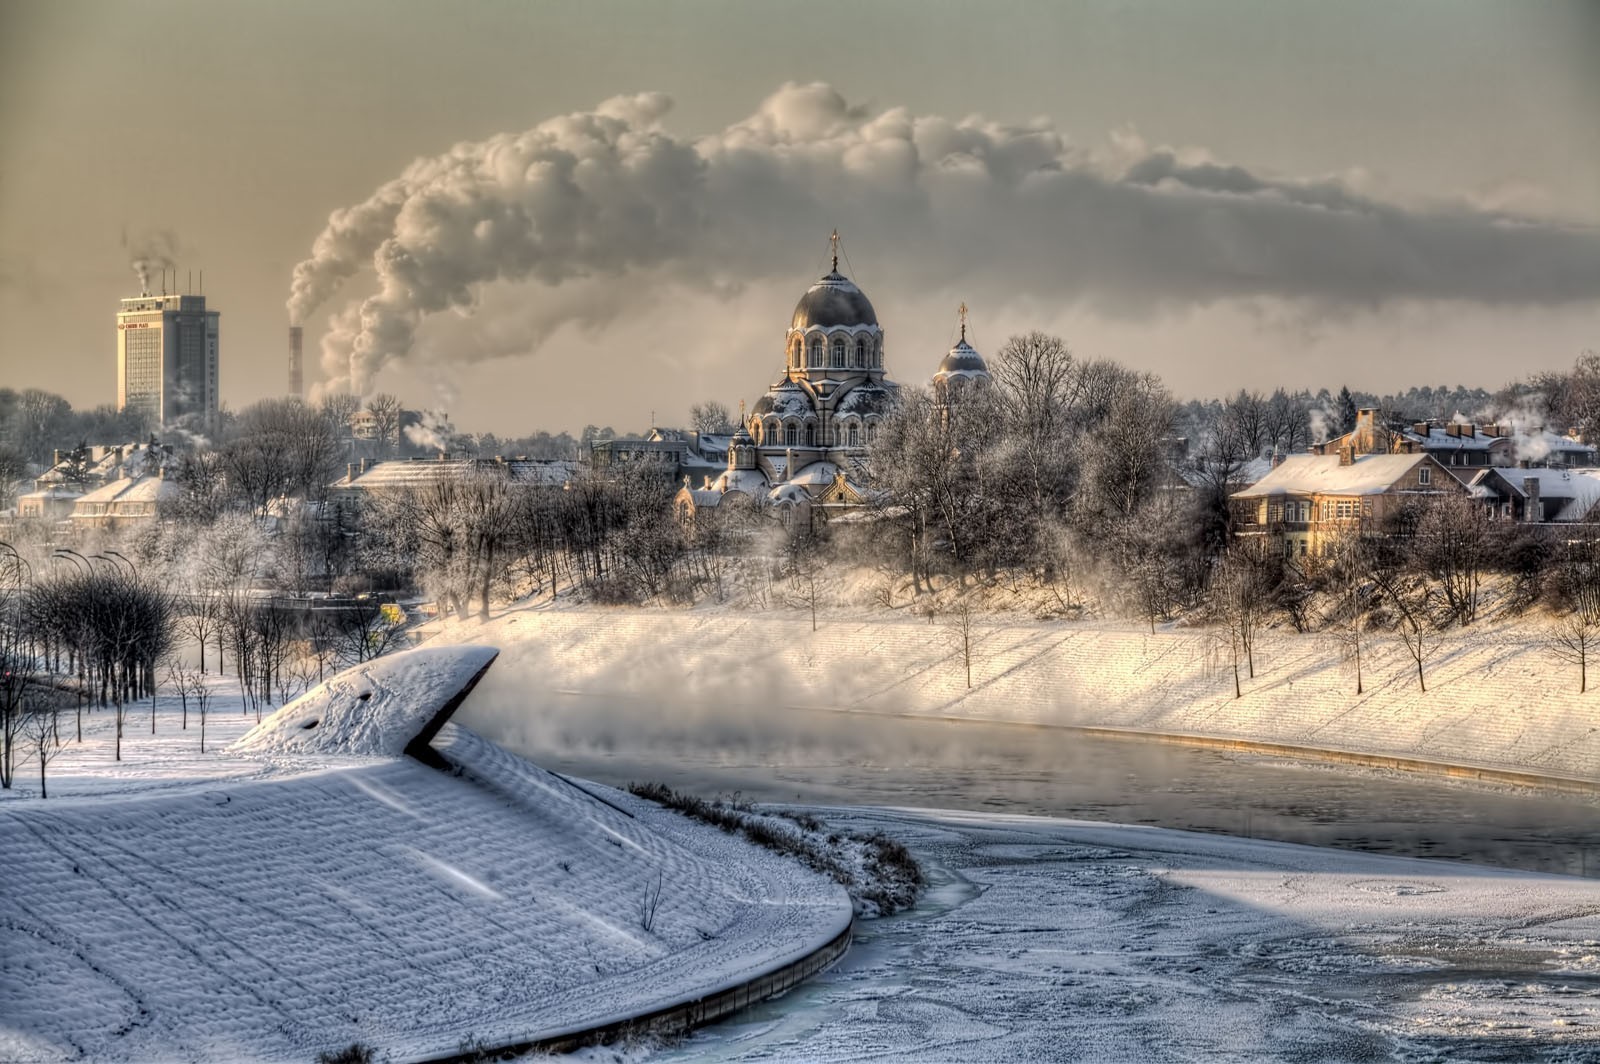 architecture, City, Cityscape, Trees, Building, Lithuania, Landscape, Winter, Snow, Cathedral, Smoke, Chimneys, Frost, Frozen River Wallpaper